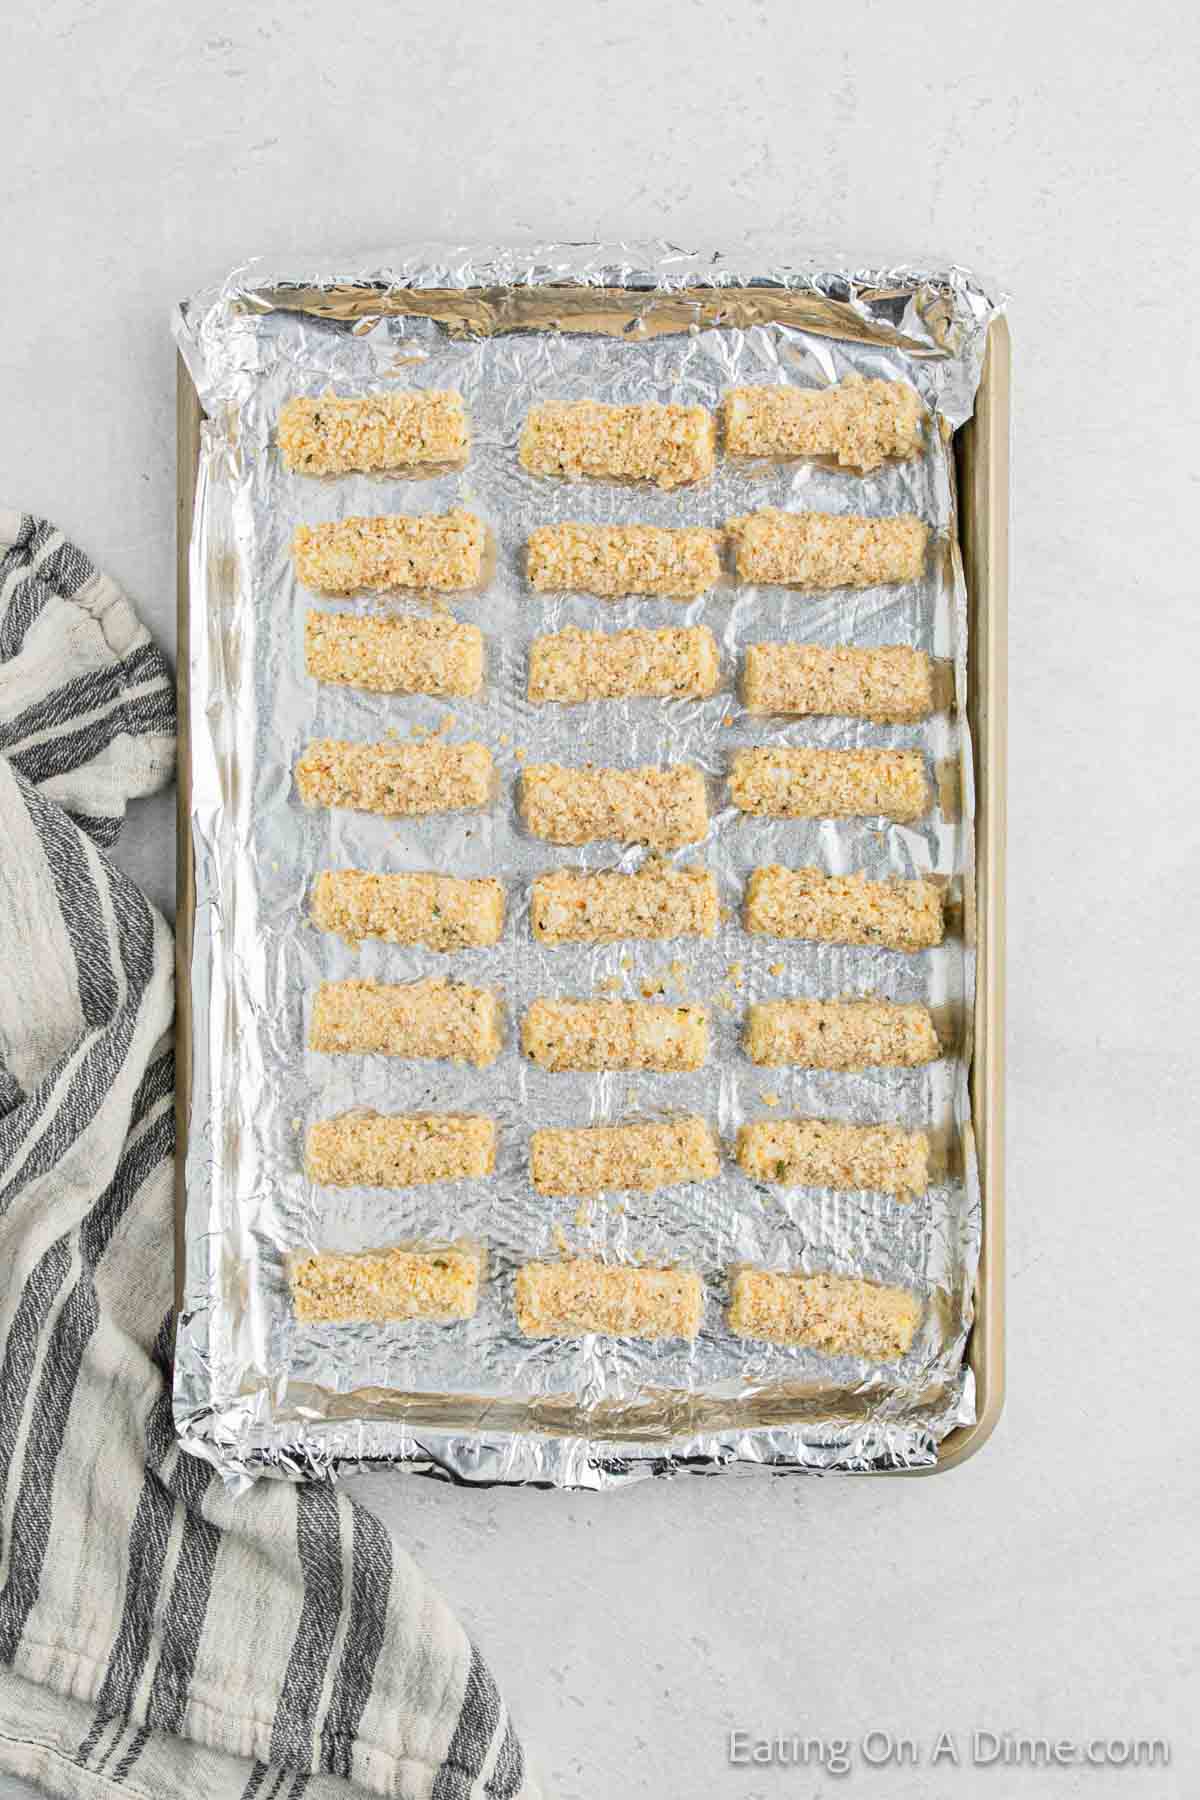 Place on the cheese sticks on a baking sheet